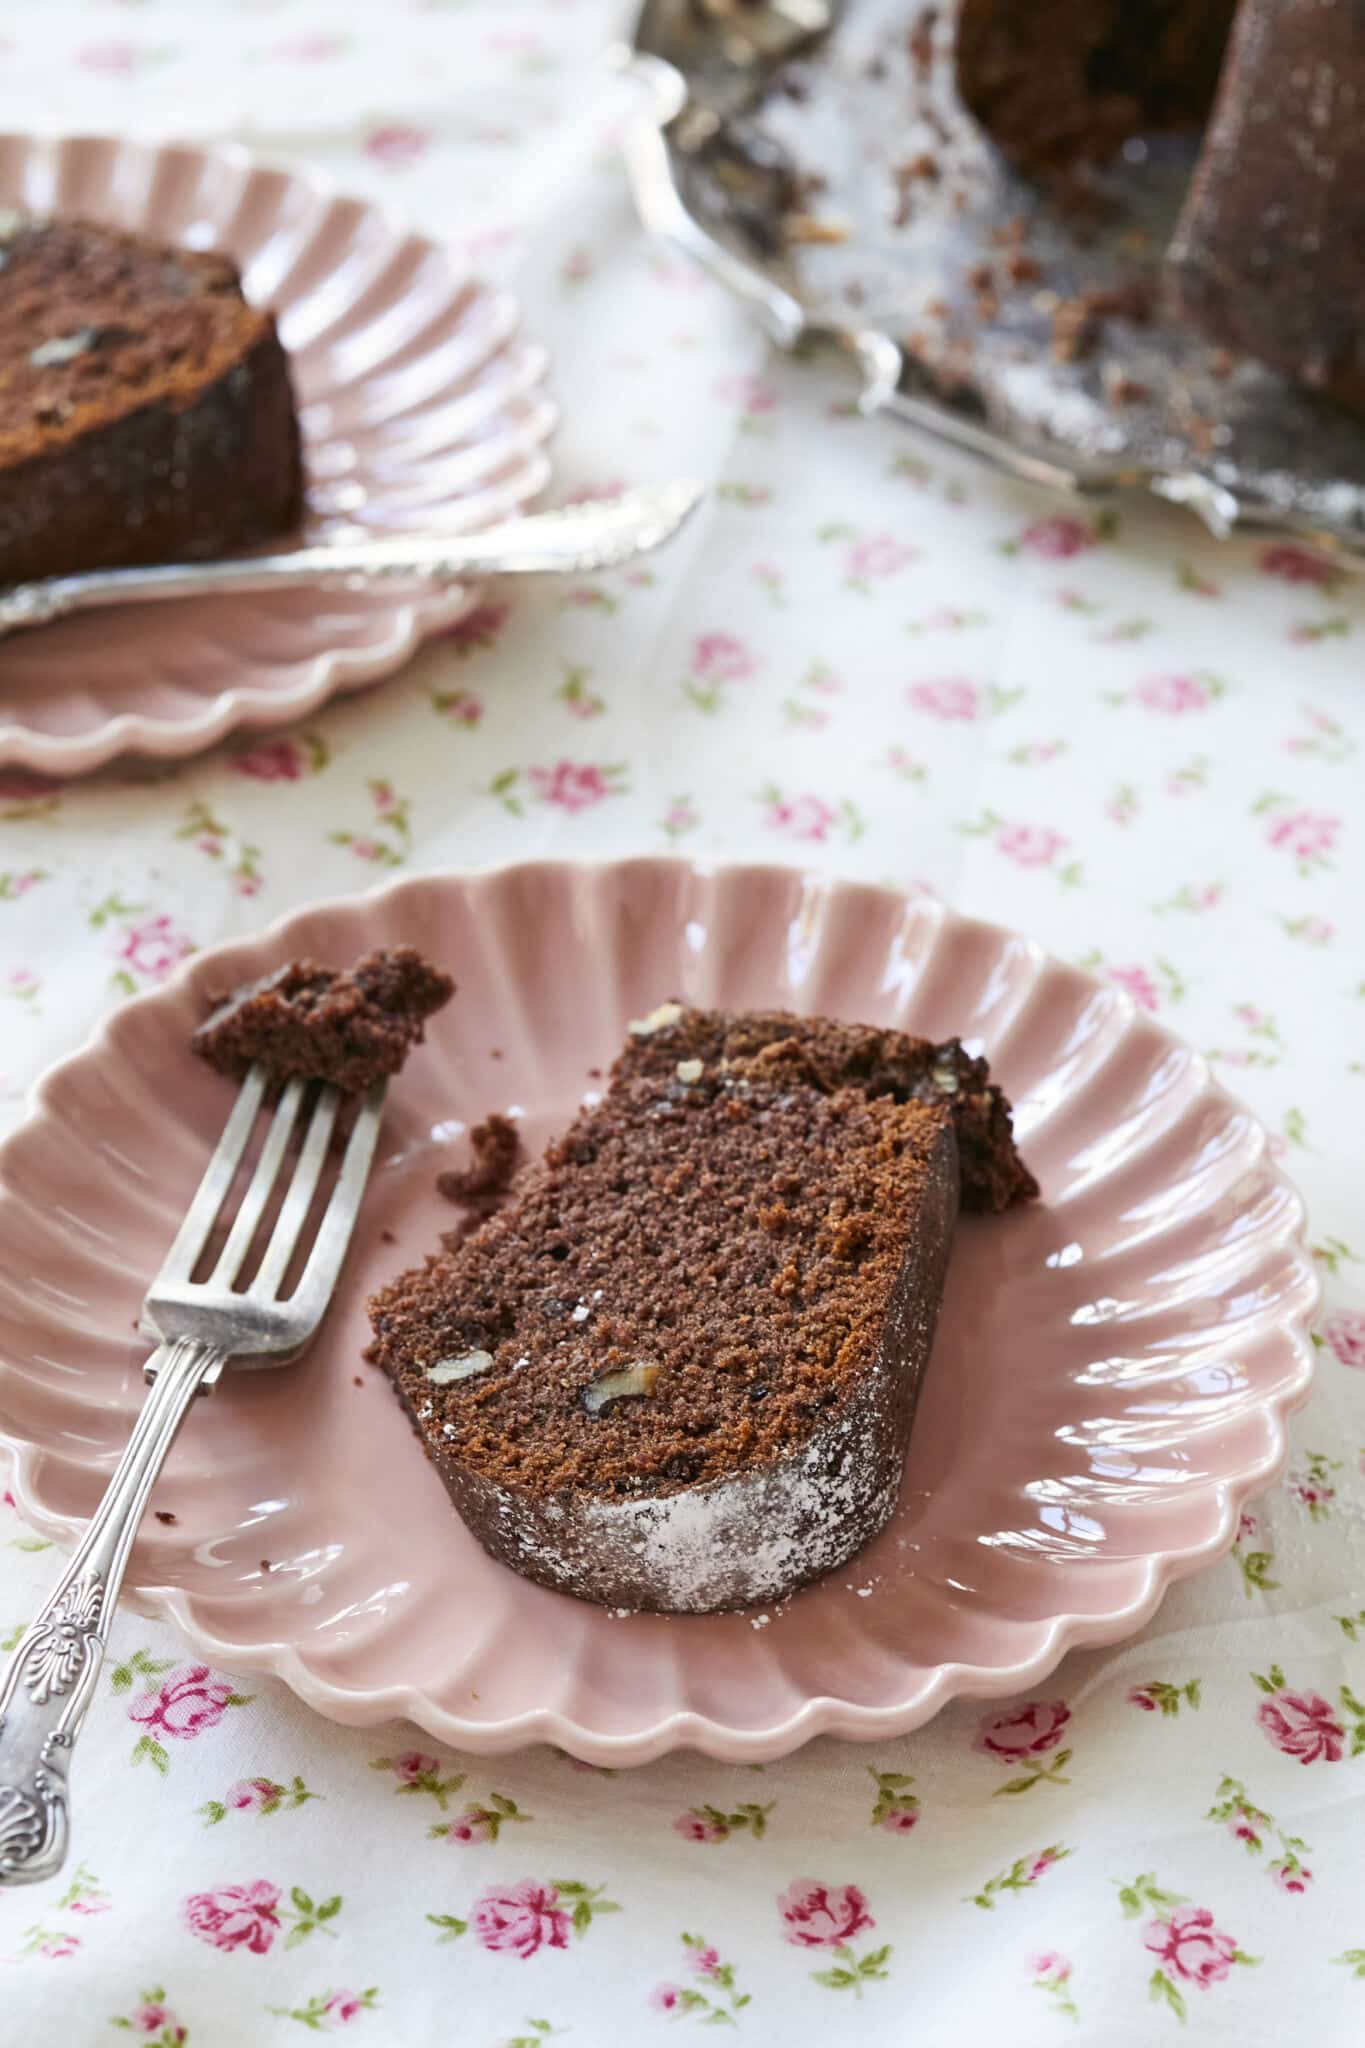 A slice of applesauce cake is served on a pink dish. The cake is brown, colored by cocoa powder, and there are walnuts throughout. 